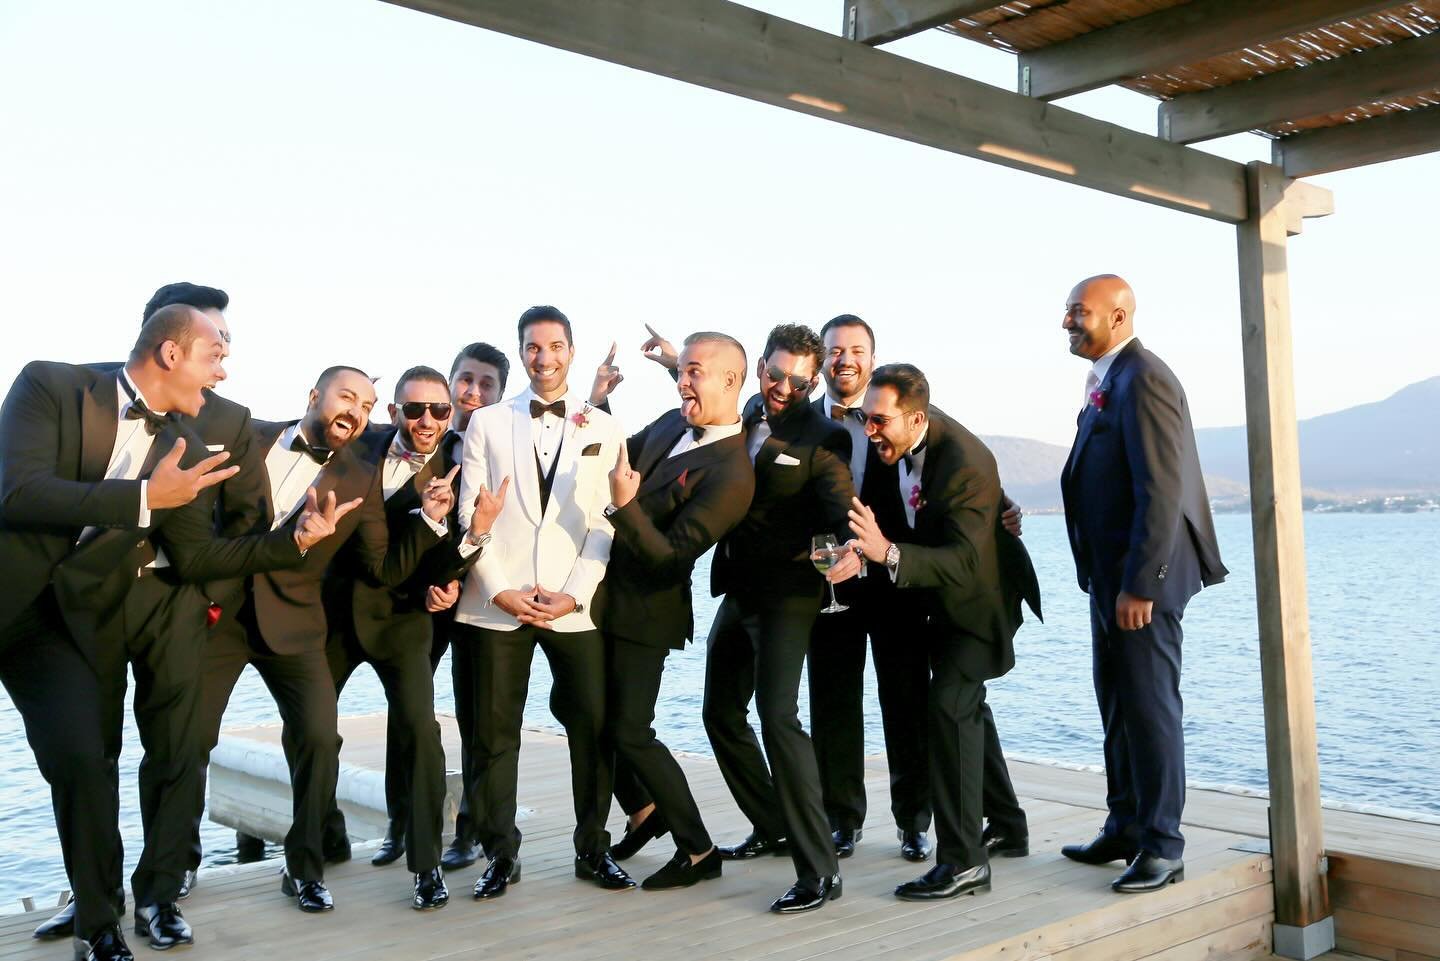 Our fun loving groom Omar getting ready and excited to see his beautiful bride with his groomsmen by his side. One of the greatest things about a destination wedding by the sea is the playfulness and calming effect of the big blue. In this case the M